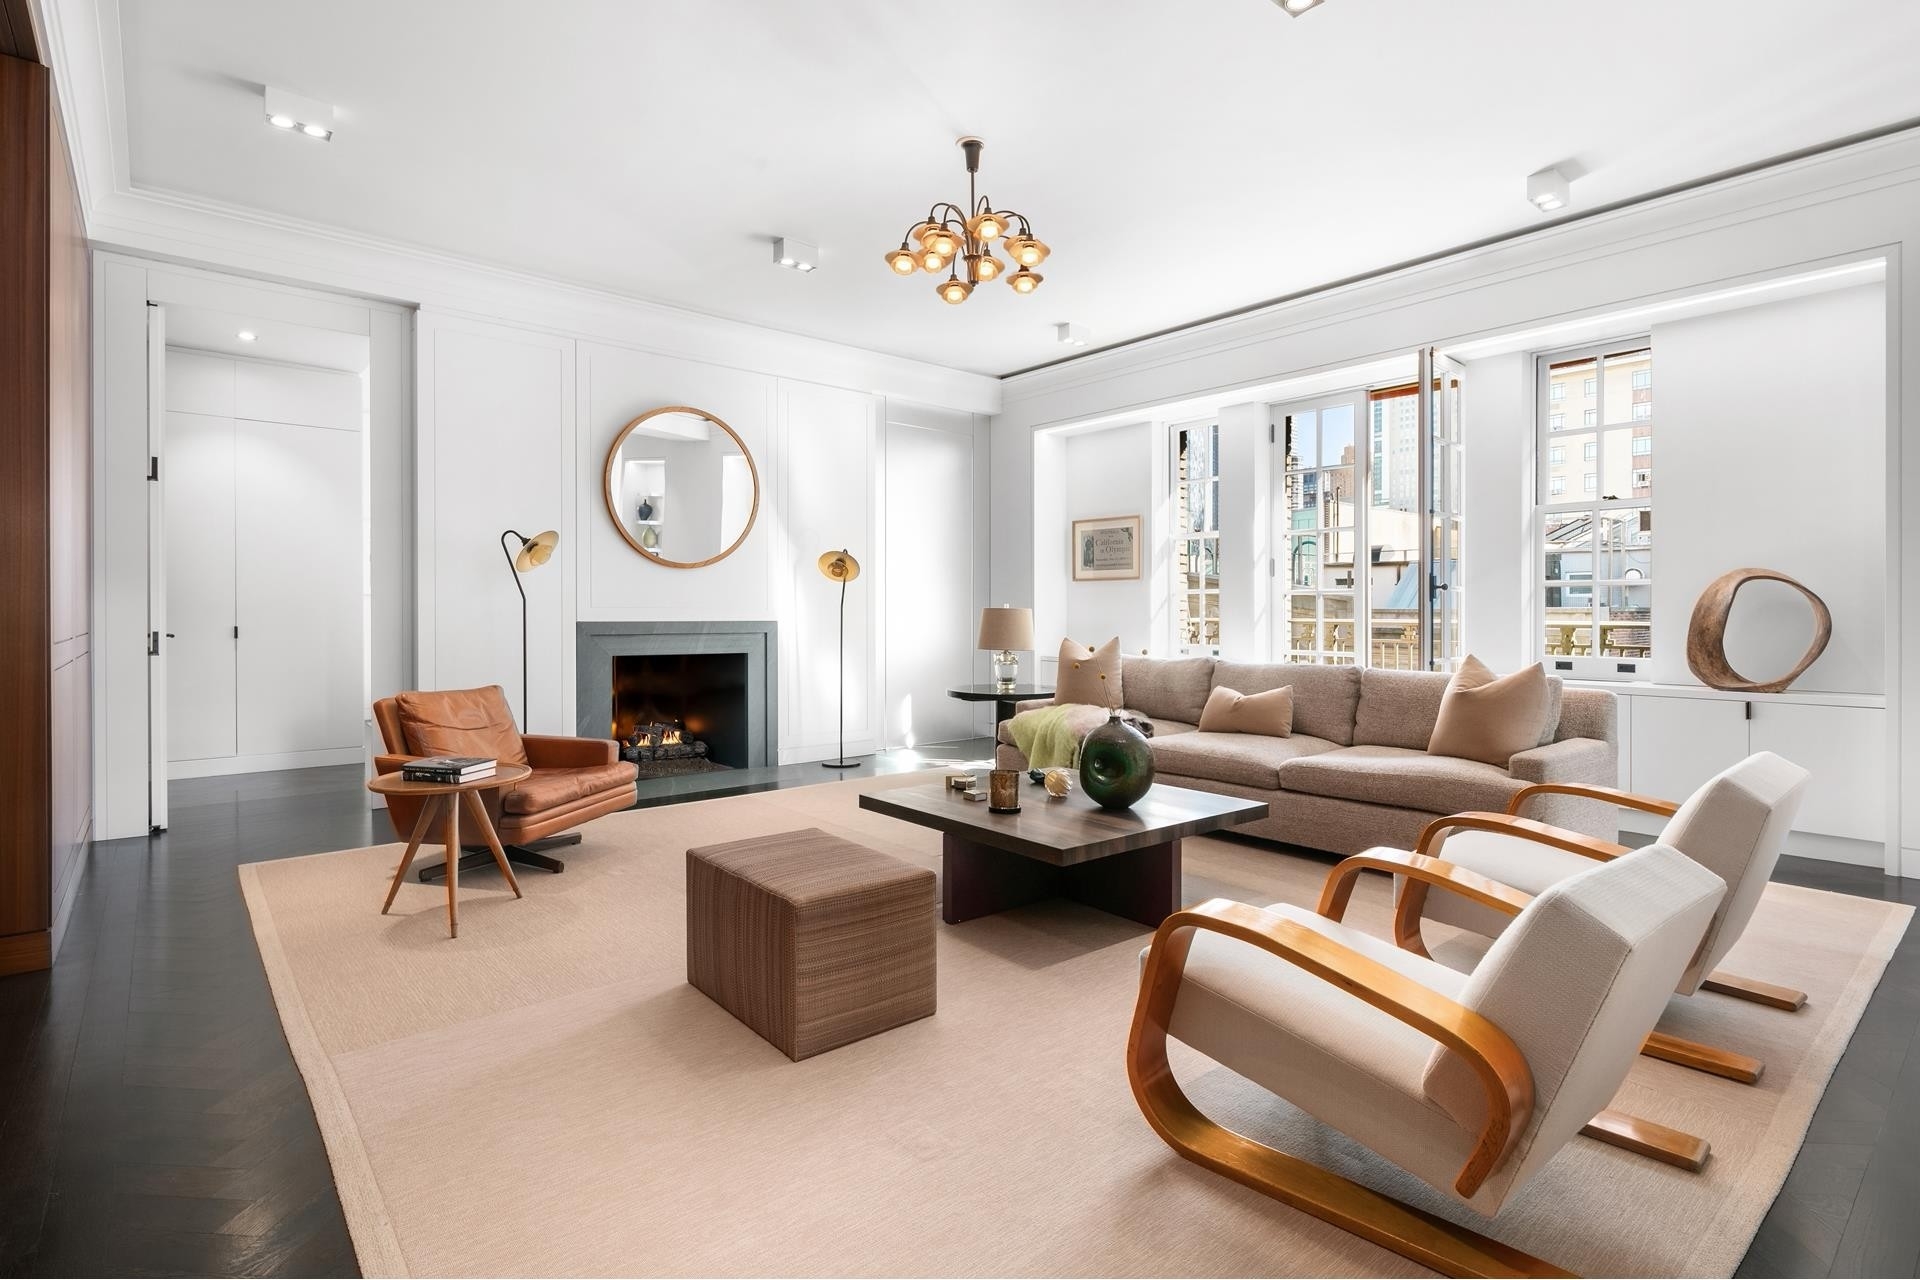 Co-op Properties for Sale at Harperley Hall, 41 CENTRAL PARK W, 8C Lincoln Square, New York, New York 10023